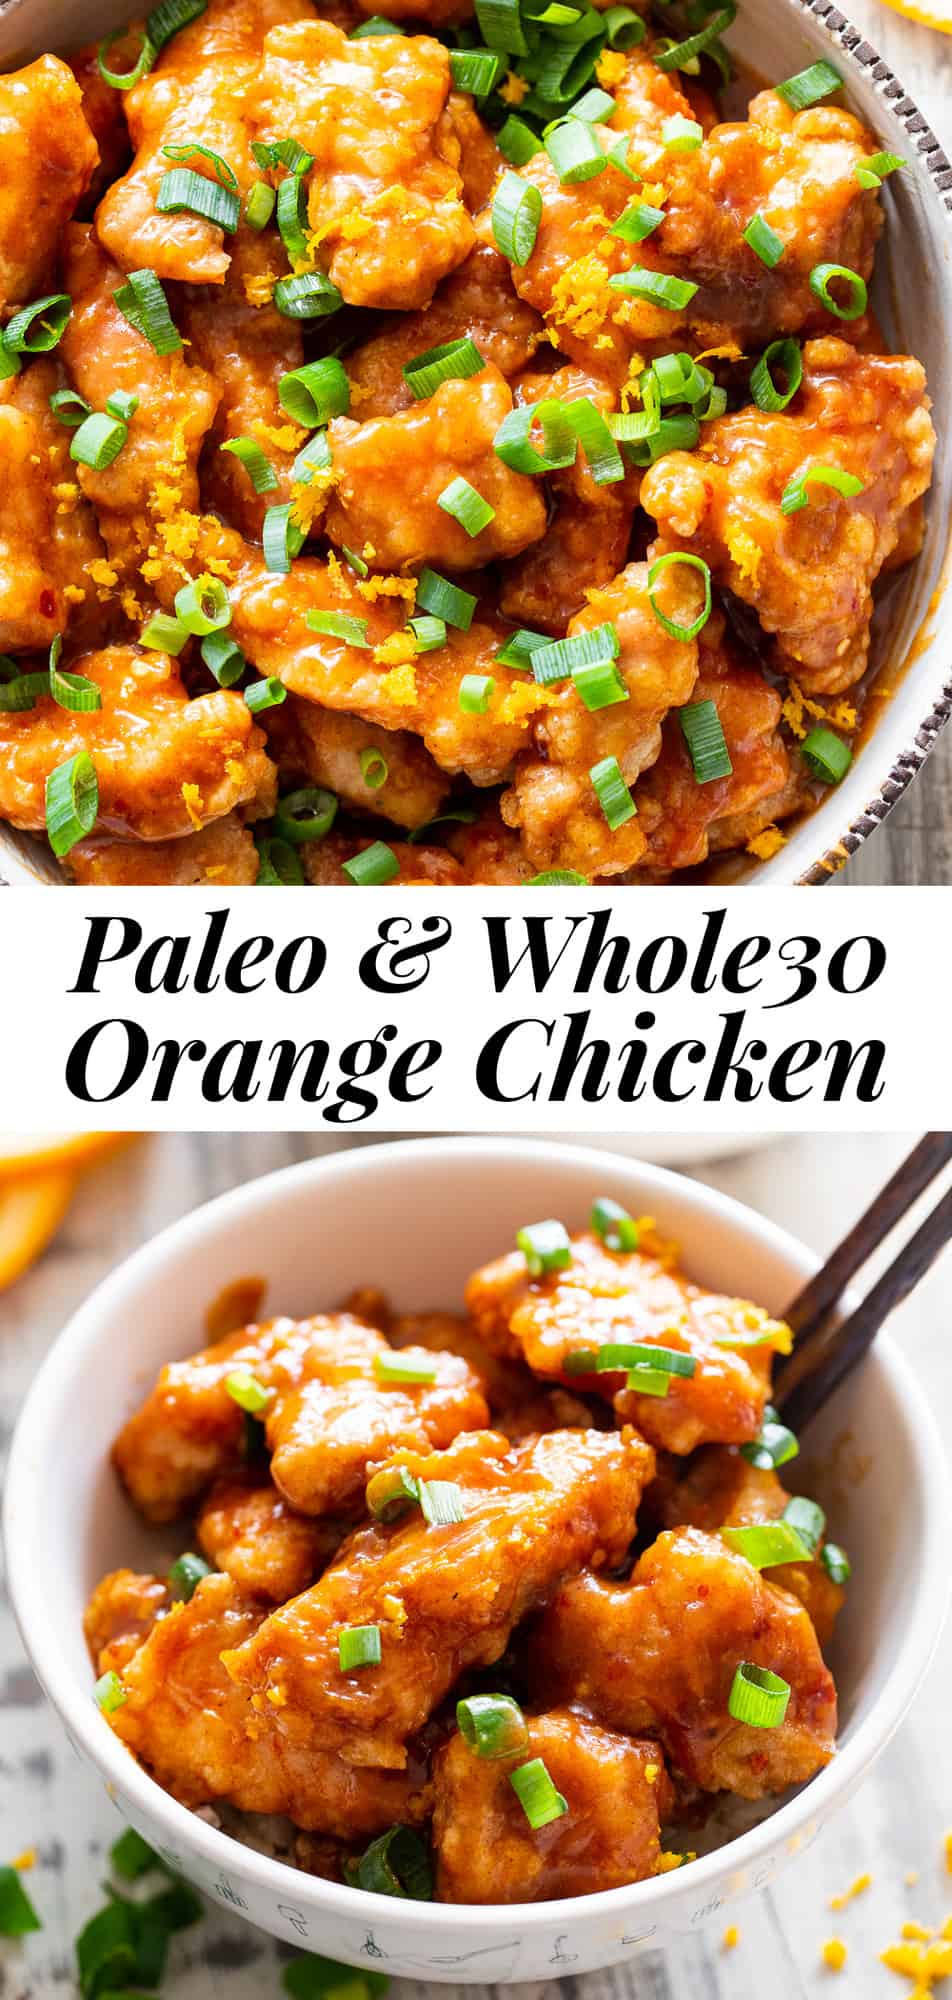  This flavor packed Paleo Chinese Orange Chicken is a healthier homemade version of a takeout favorite! It’s easy to make and contains no refined sugar, family approved and seriously tasty. Keep it Paleo and Whole30 compliant by serving over fried cauliflower rice or with your favorite stir fried veggies. #paleo #whole30 #cleaneating